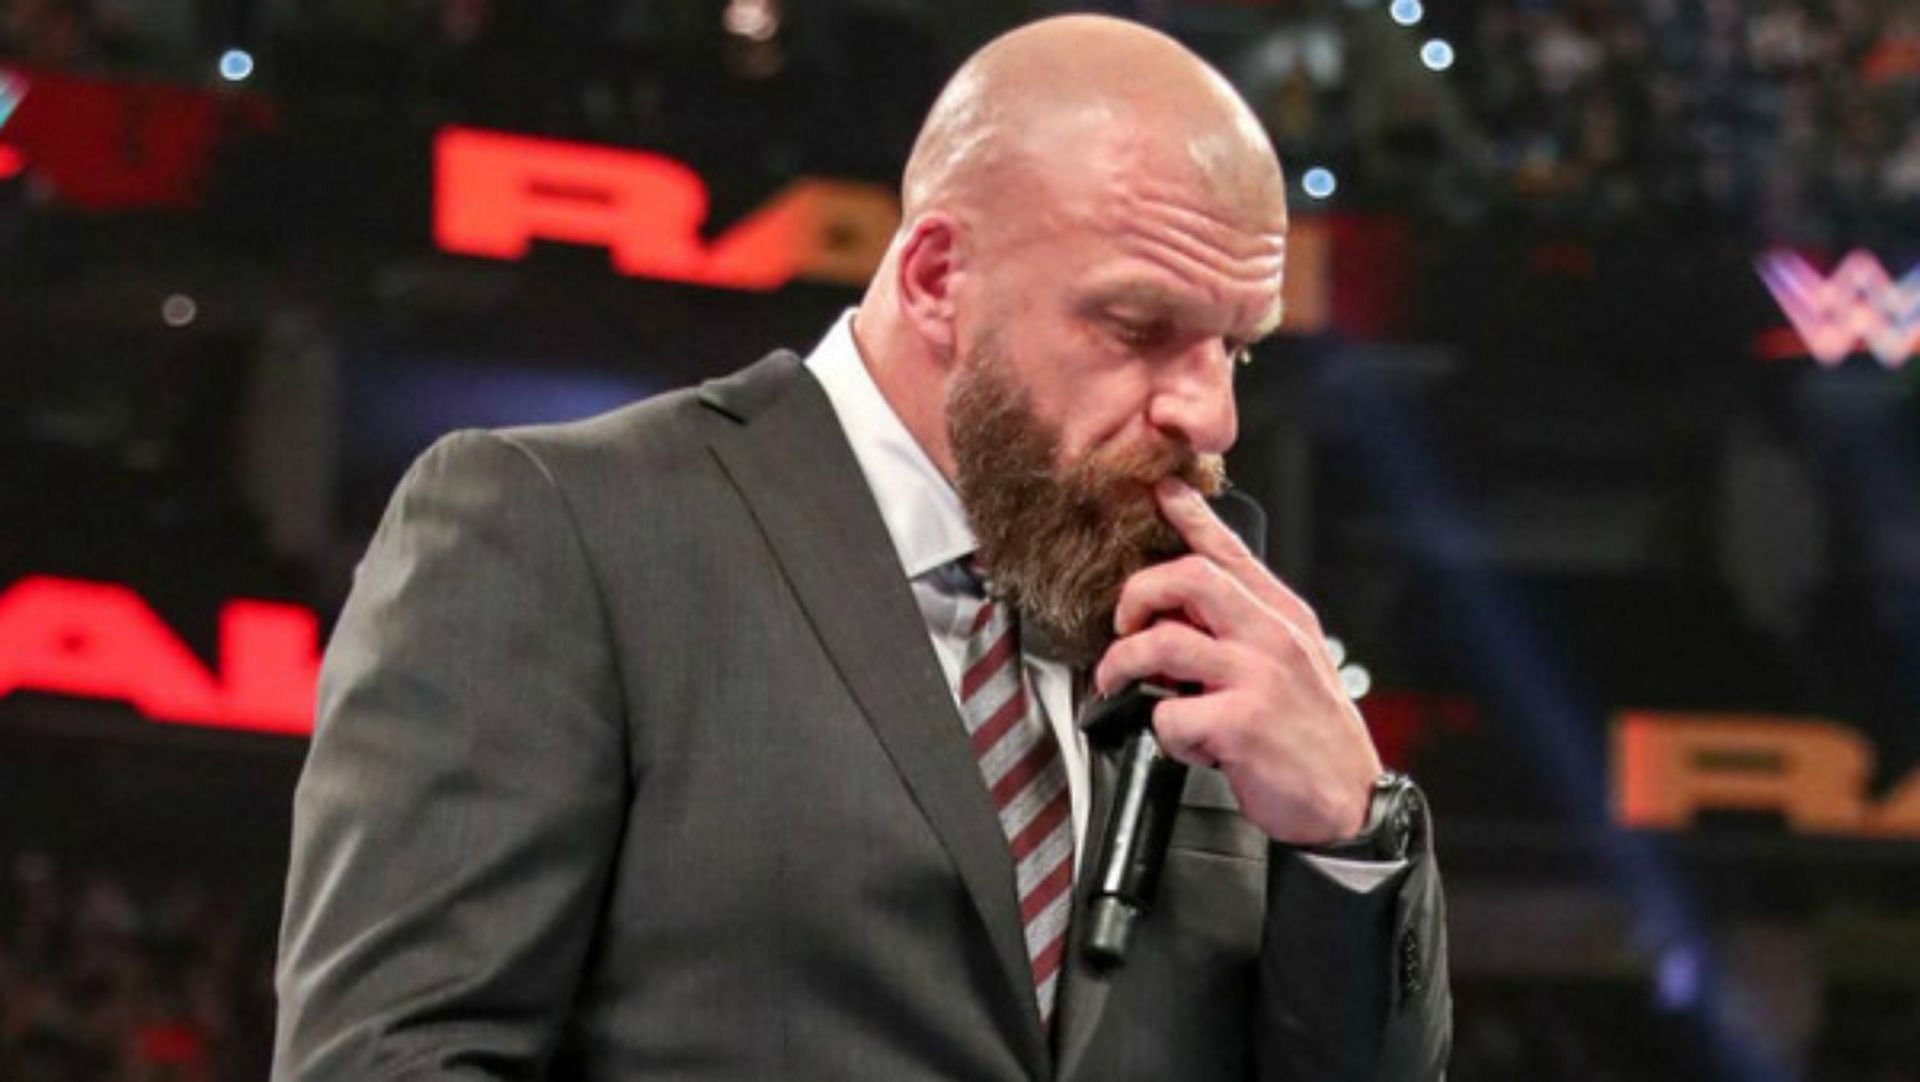 Triple H has re-signed many former stars back to WWE.